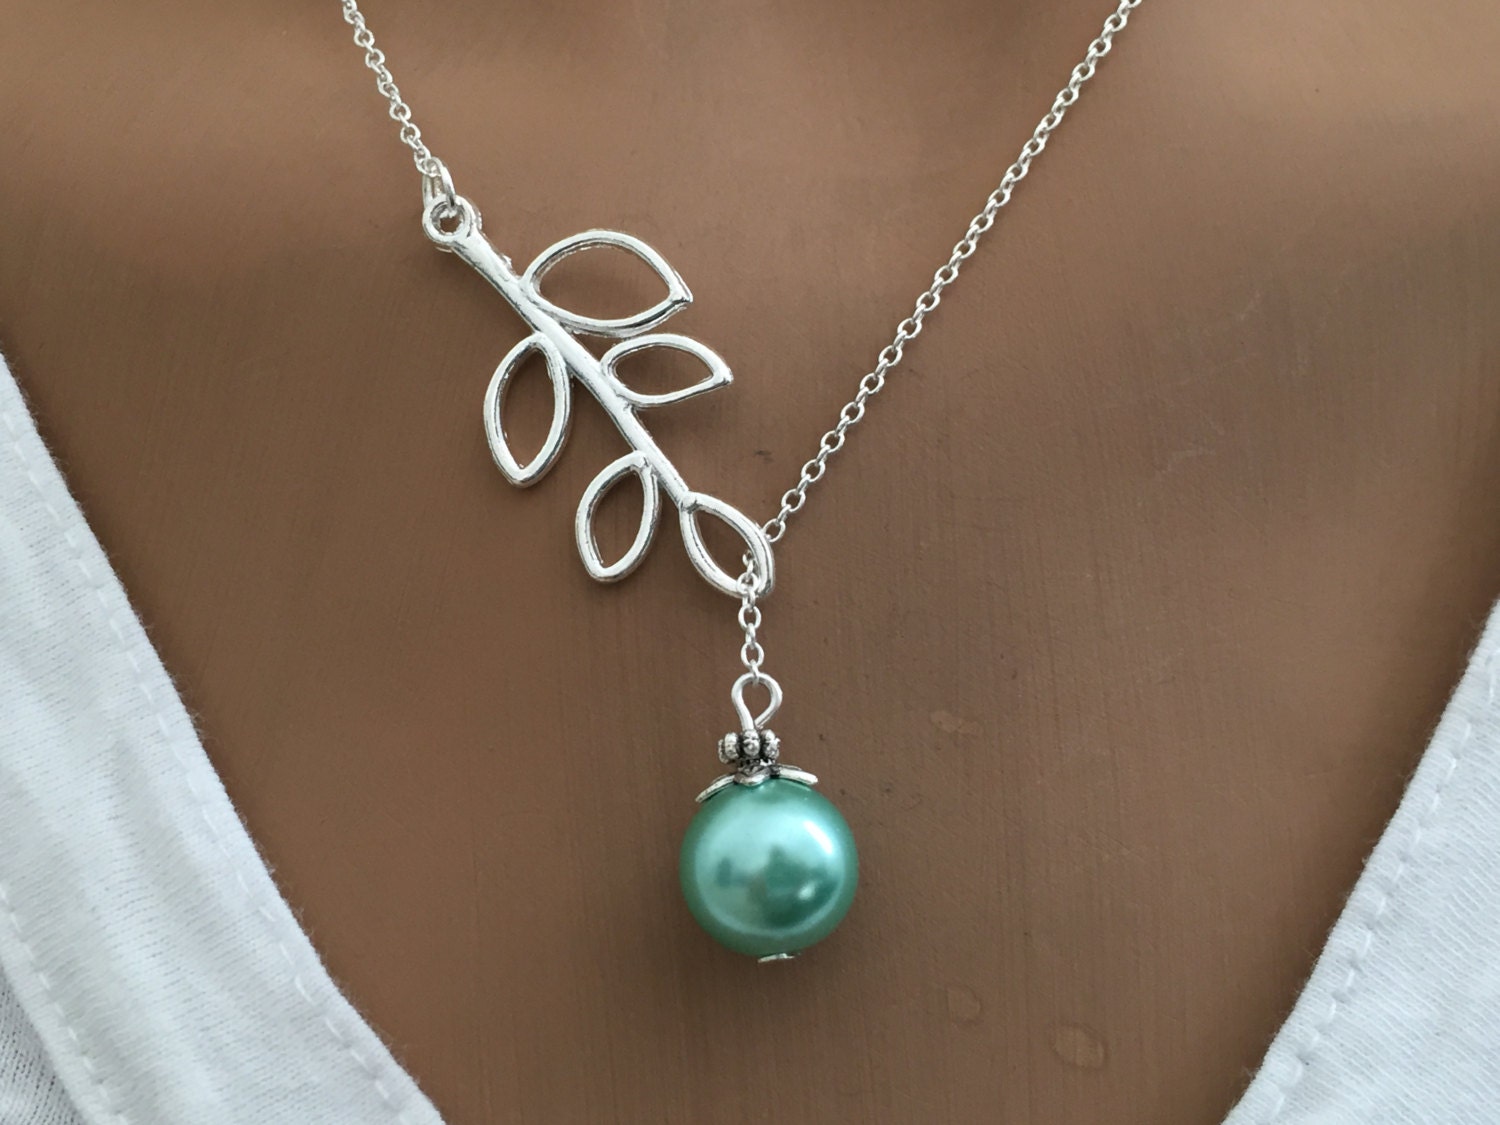 lariat style necklace pearl necklace gift